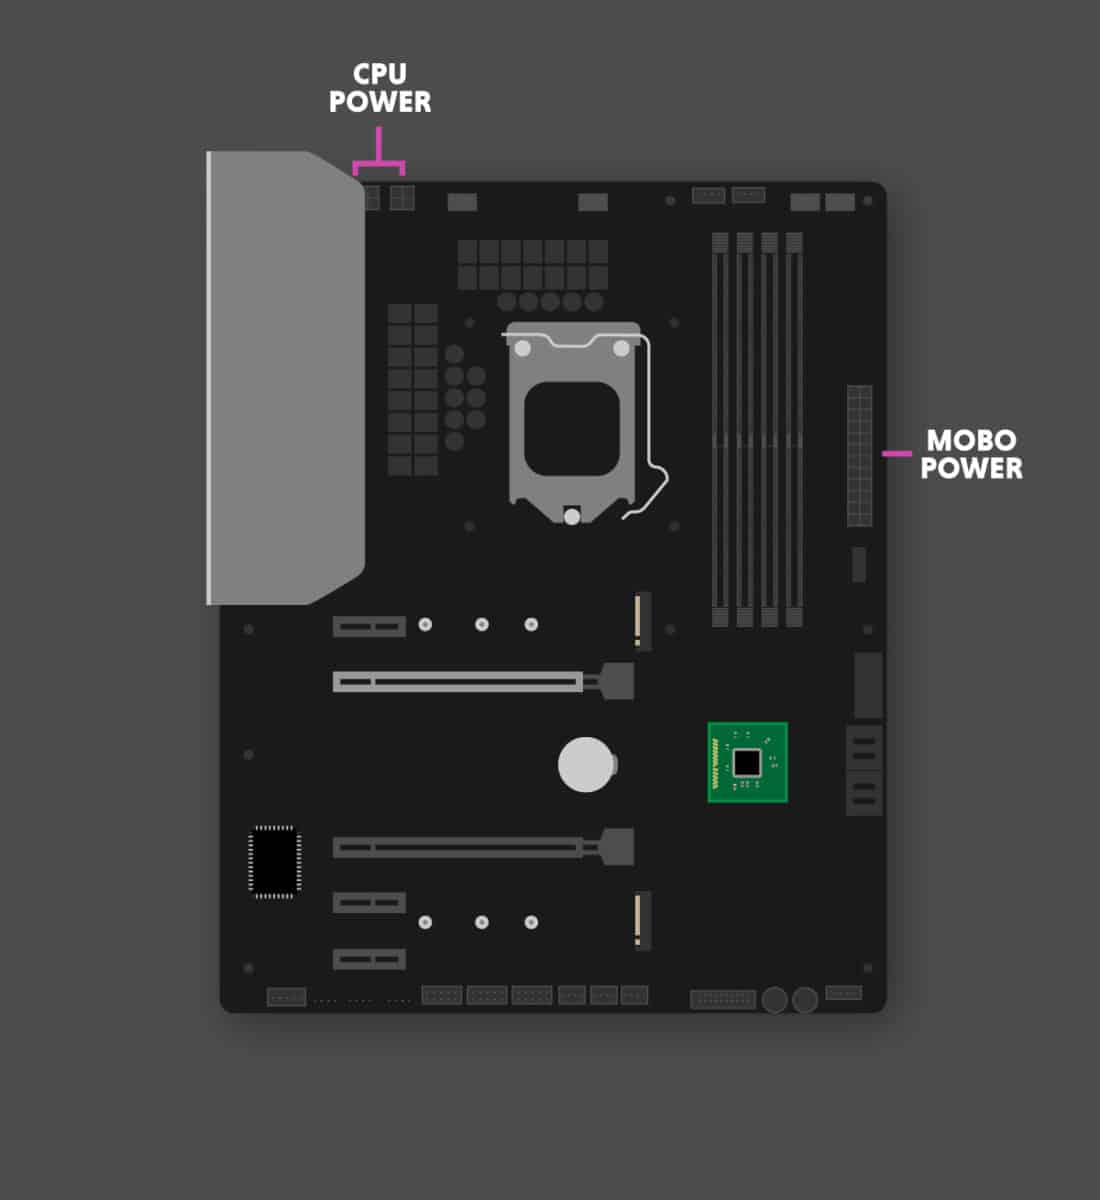 Mobo anatomy labels power